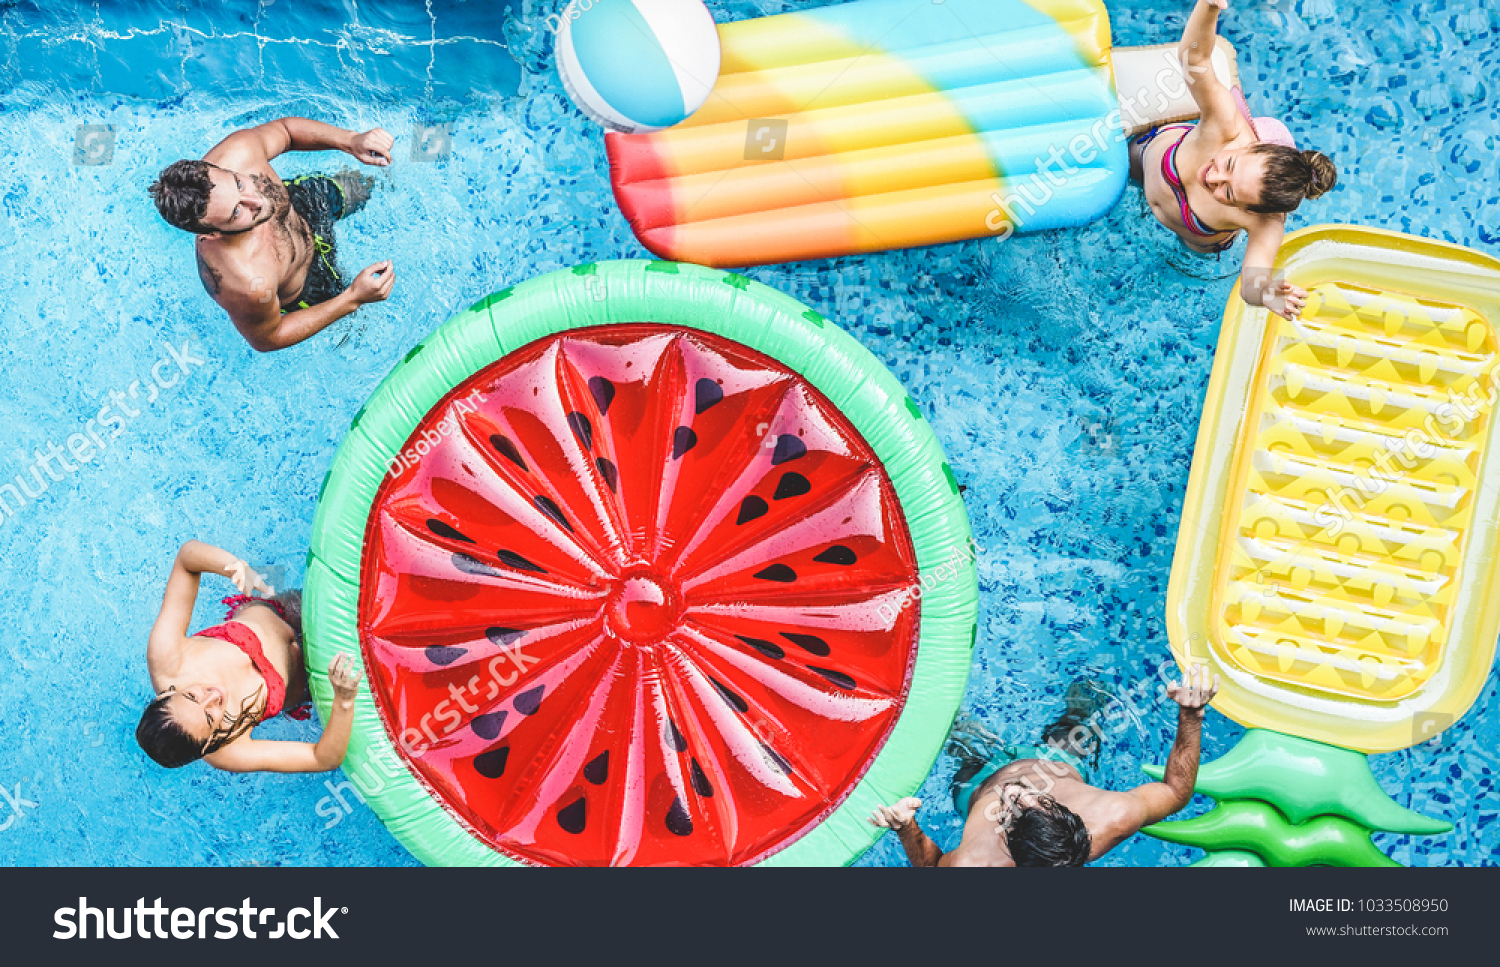 Happy friends playing with air lilo ball inside swimming pool - Young people having fun on summer holidays vacation - Travel, holidays, youth lifestyle, friendship and tropical concept #1033508950